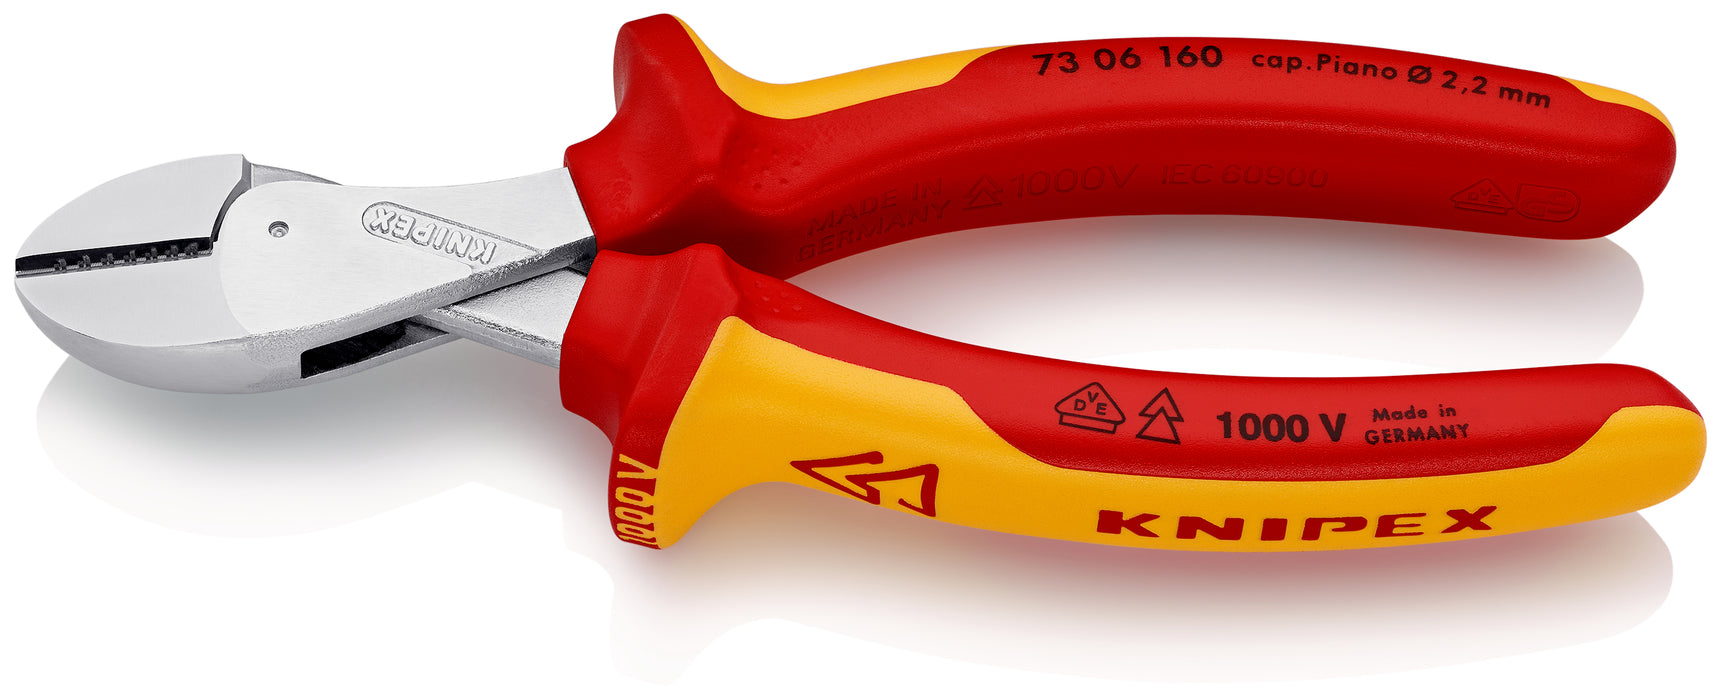 X-Cut® Compact Diagonal Cutter 1000V-insulated 160mm - 73 06 160 Tool Monster